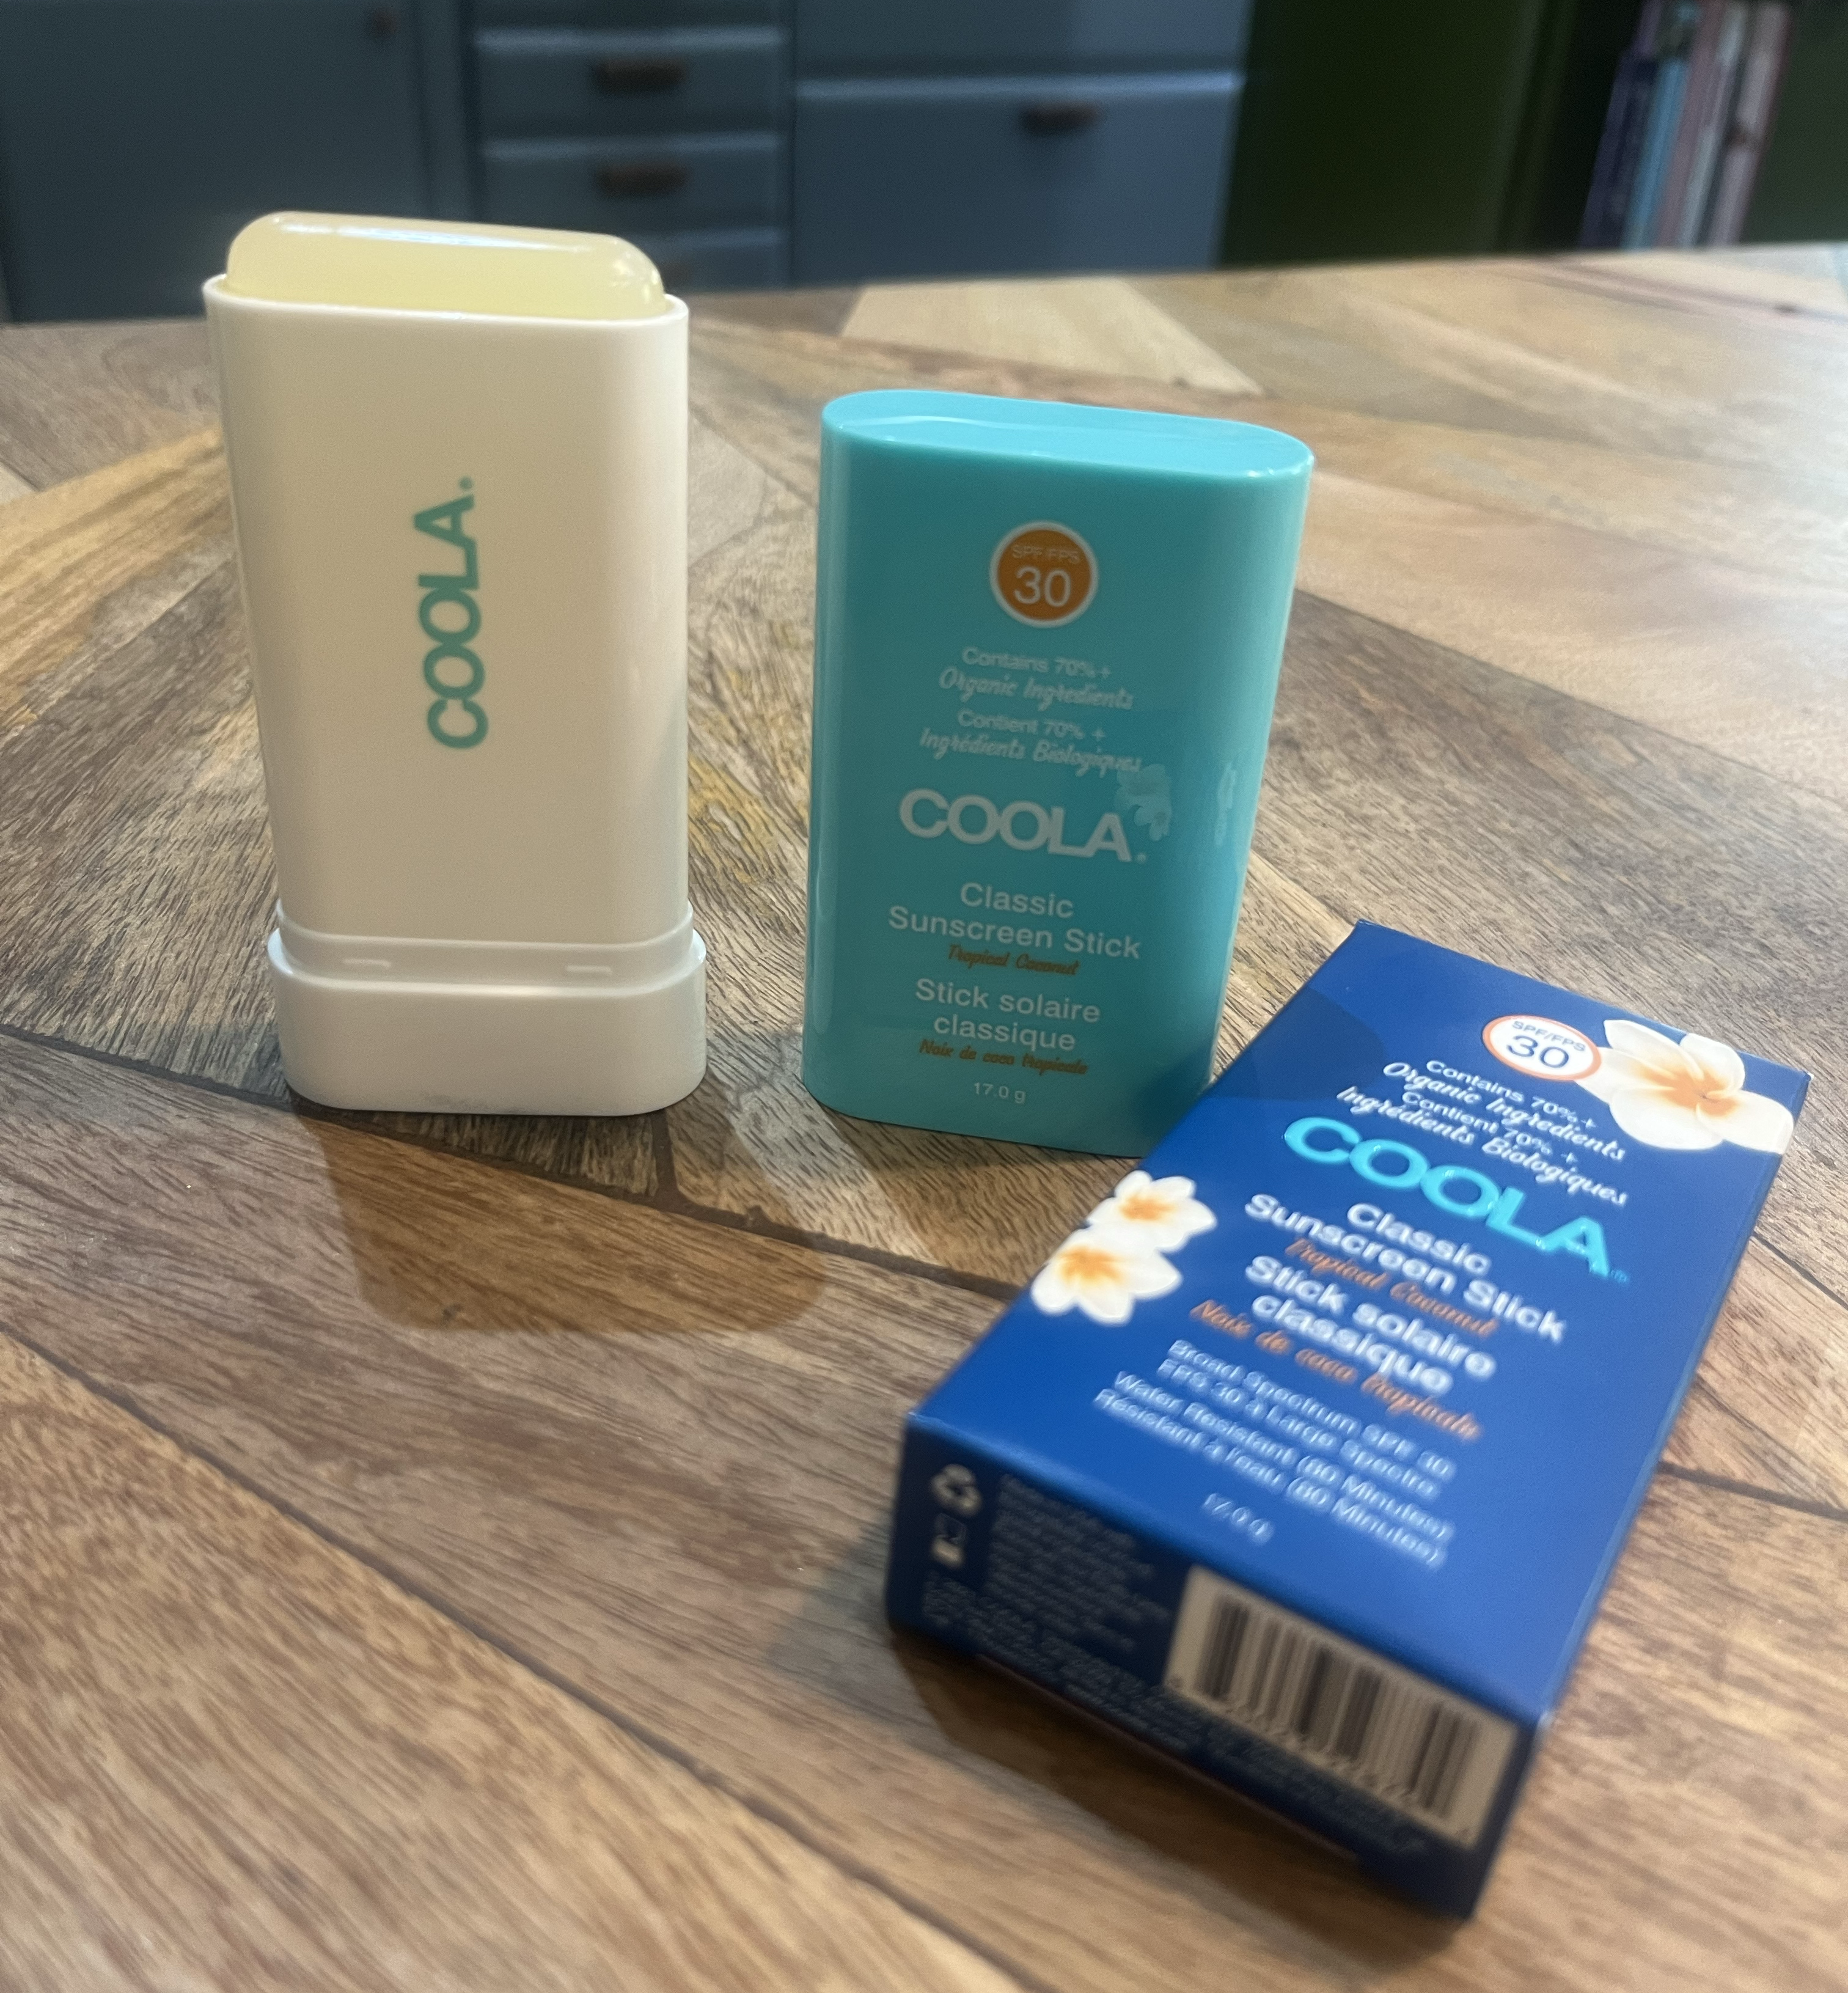 The Coola Classic Sunscreen Stick makes it easy to top up throughout the day.